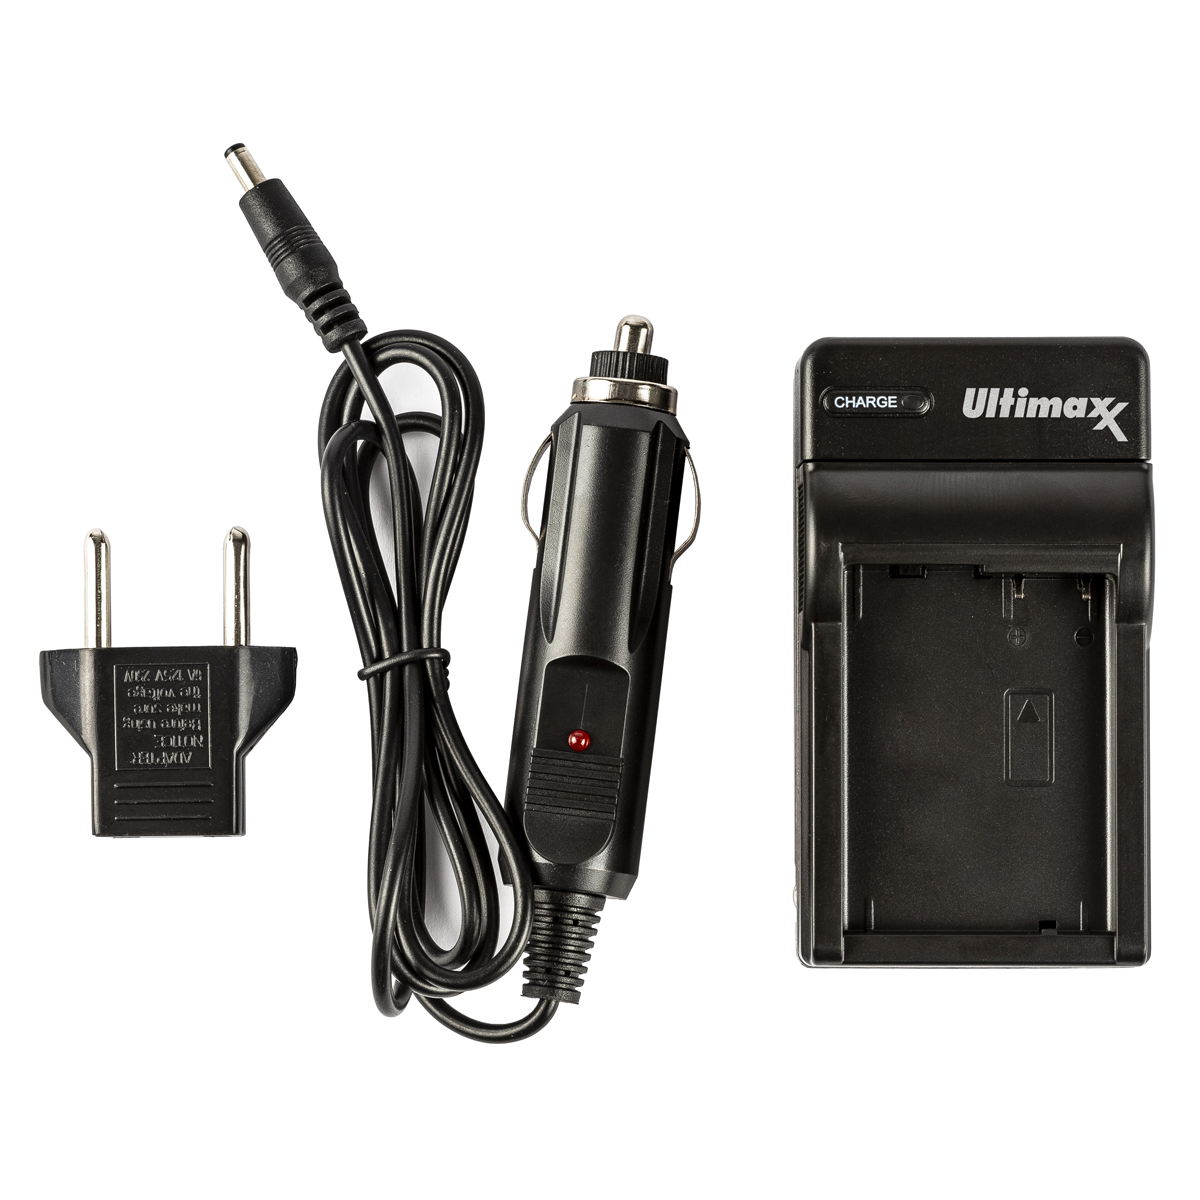 ULTIMAXX Travel Charger for So